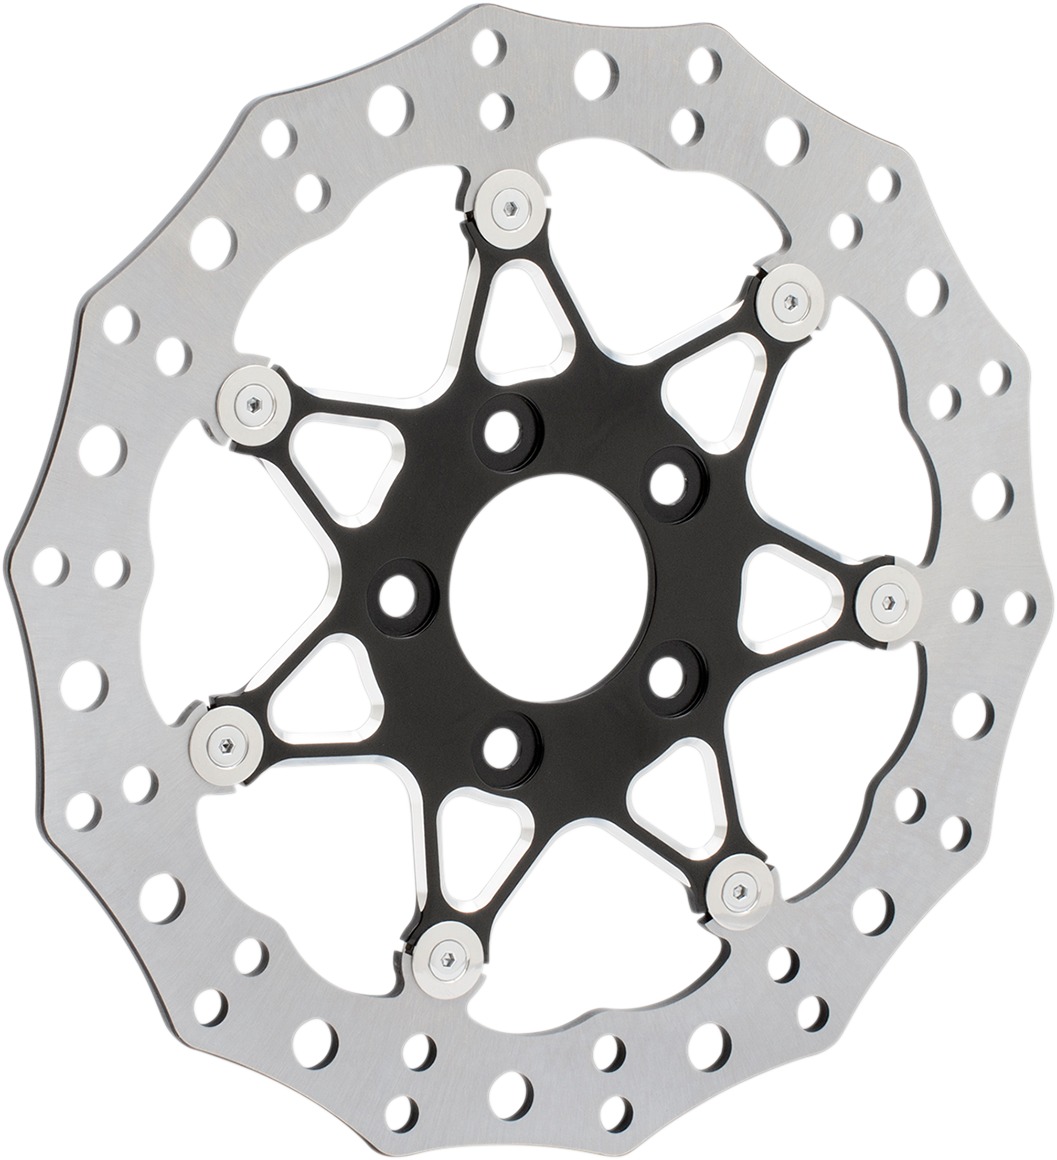 Procross Contour Floating Front Brake Rotor 300mm - Black - For Harley - Click Image to Close